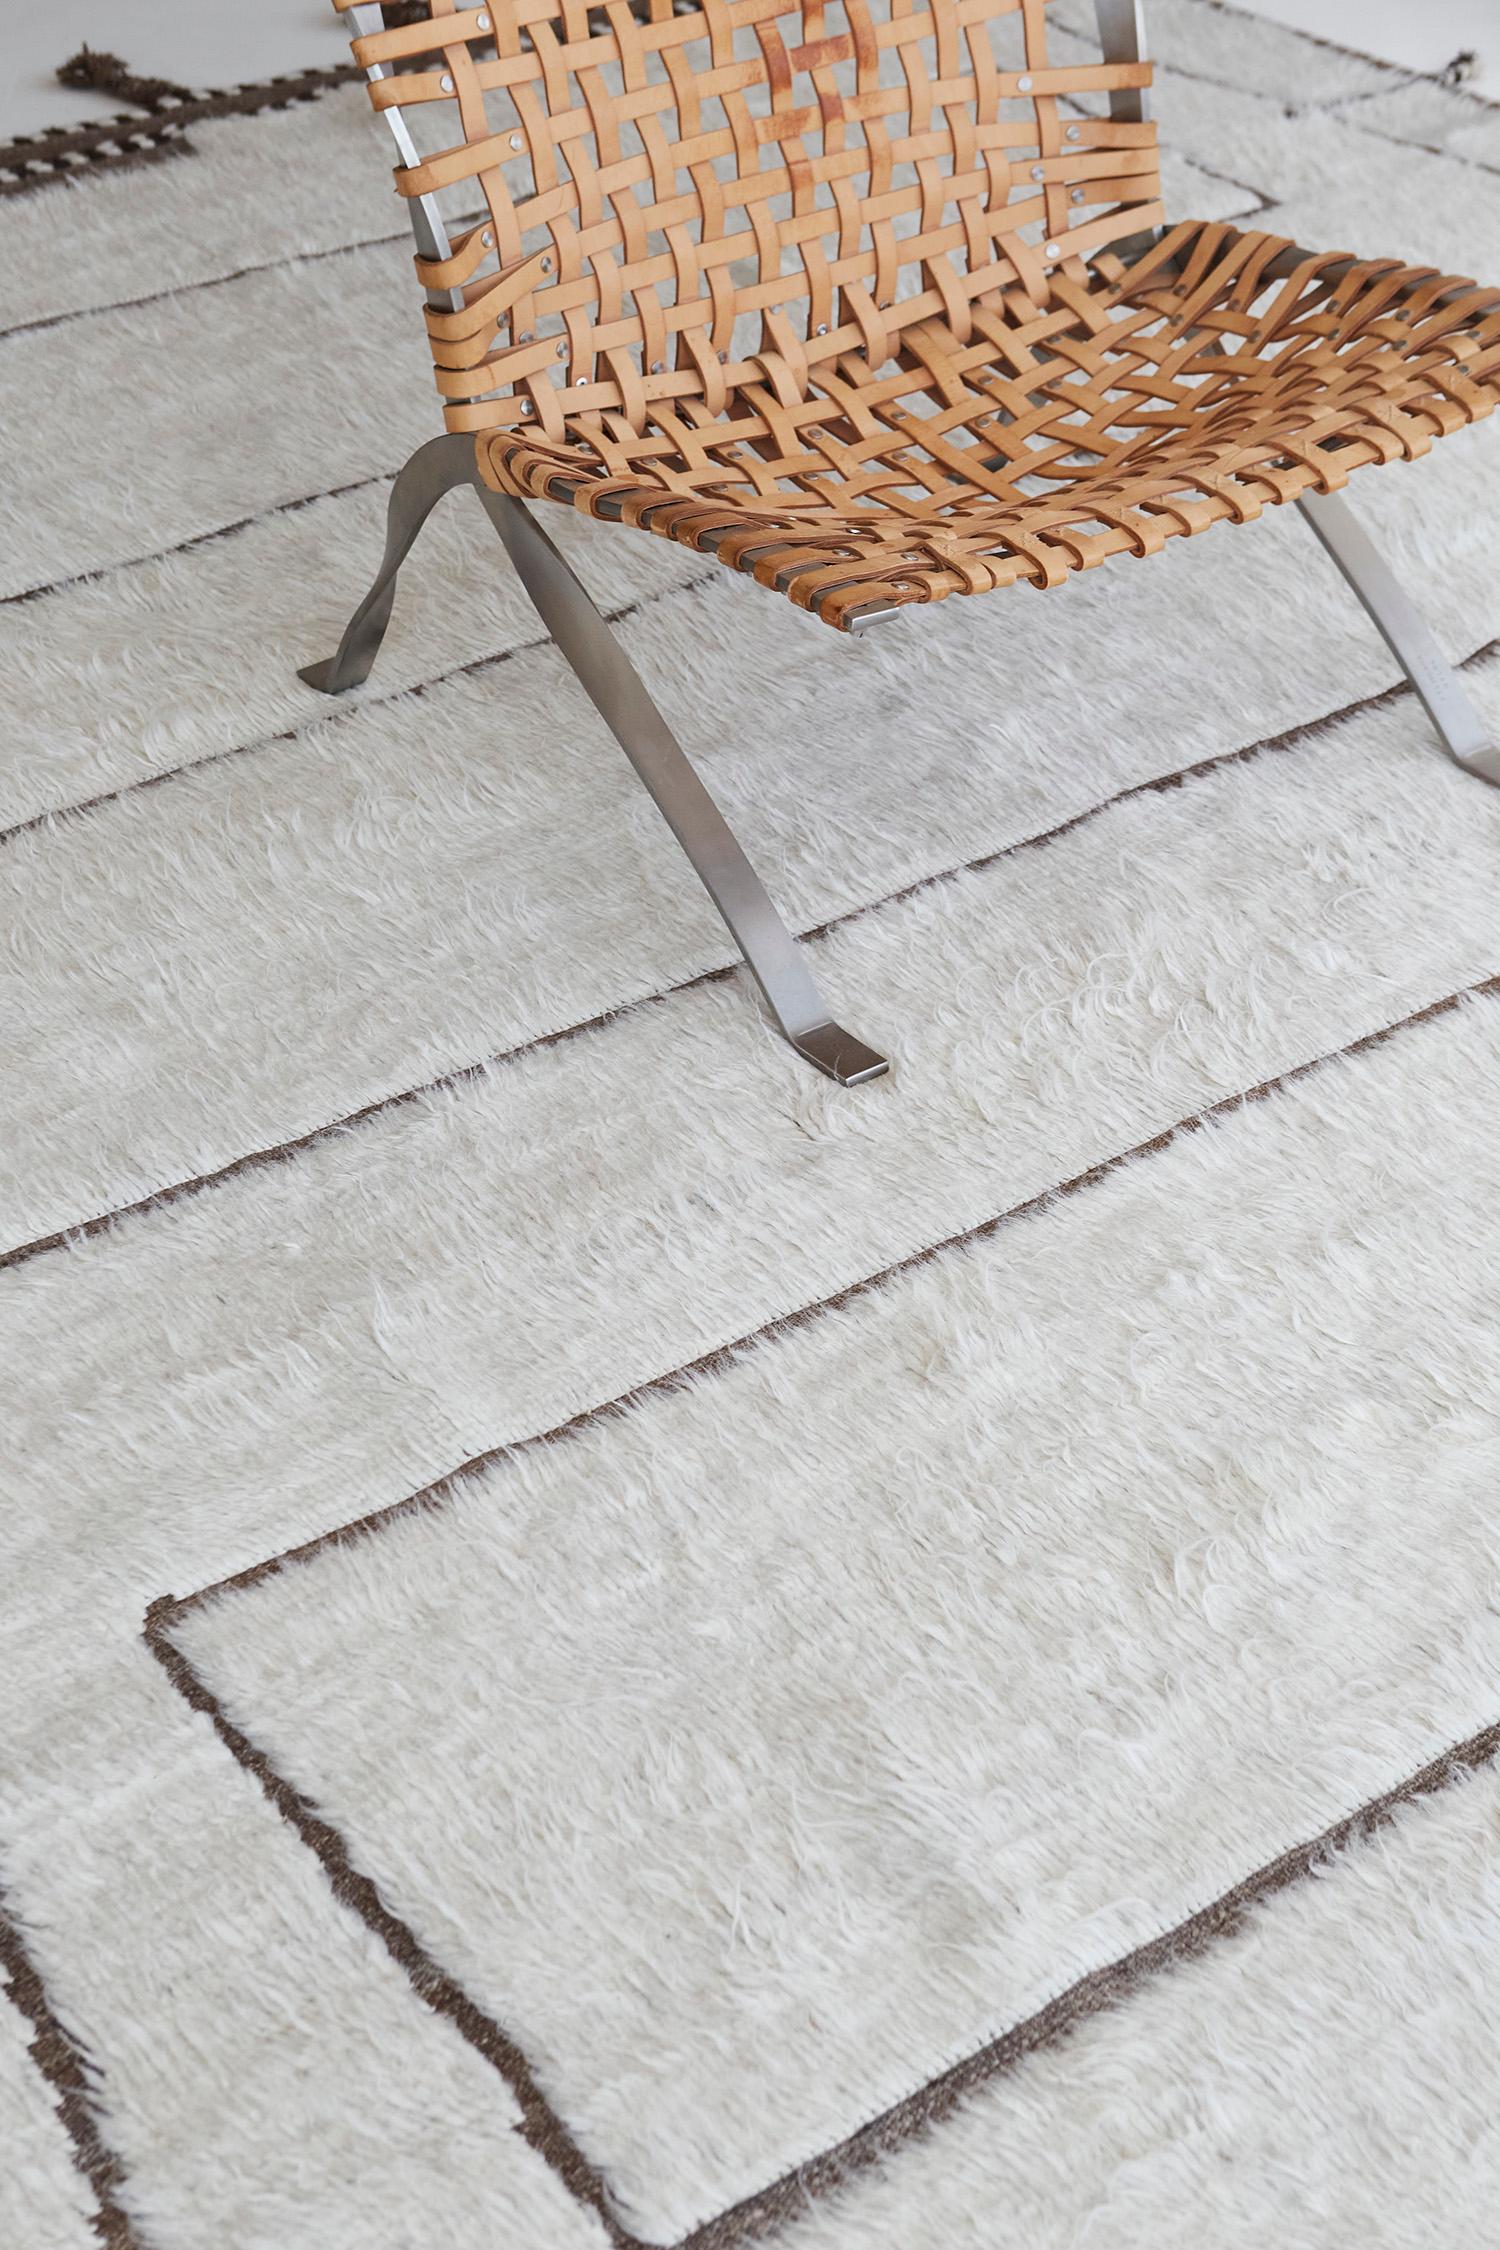 The signature collection of California. Handwoven luxurious wool rug, made of timeless design elements and neutral earth tones. Haute Bohemian collection: designed in Los Angeles named for the winds knitting together seasons, trees, dwellers of